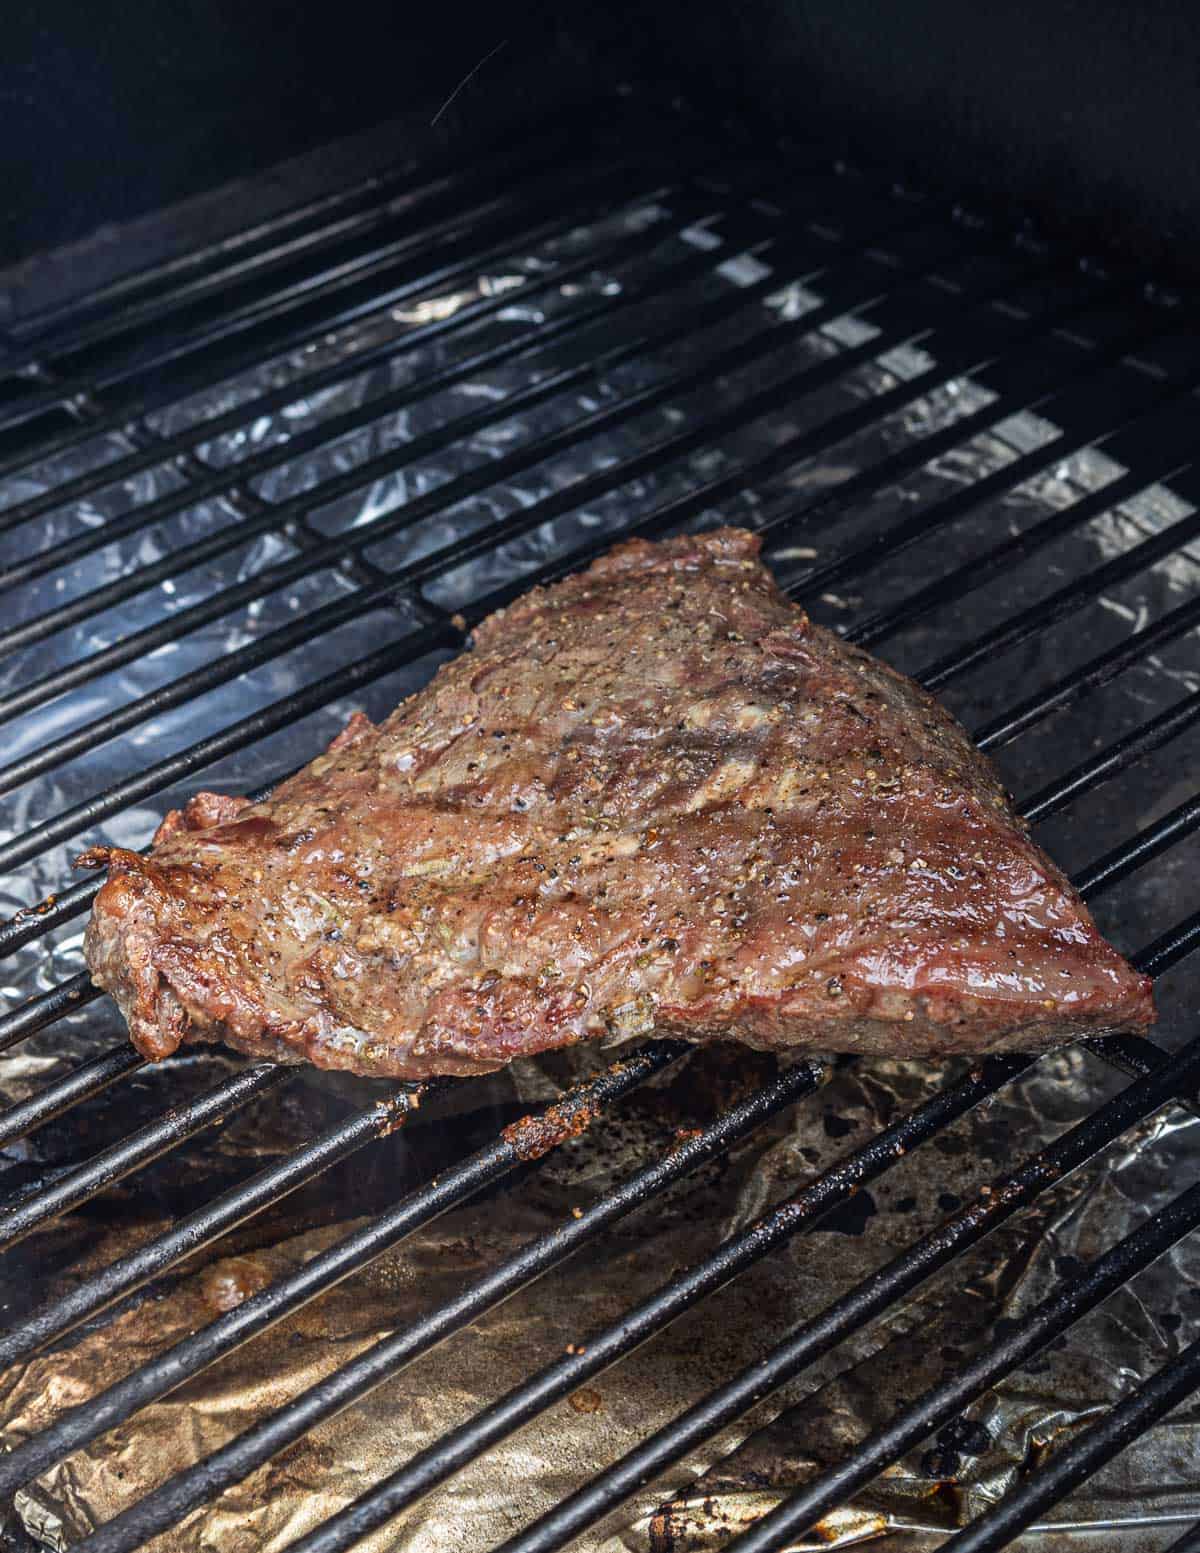 Cooking a bavette steak on a grill.